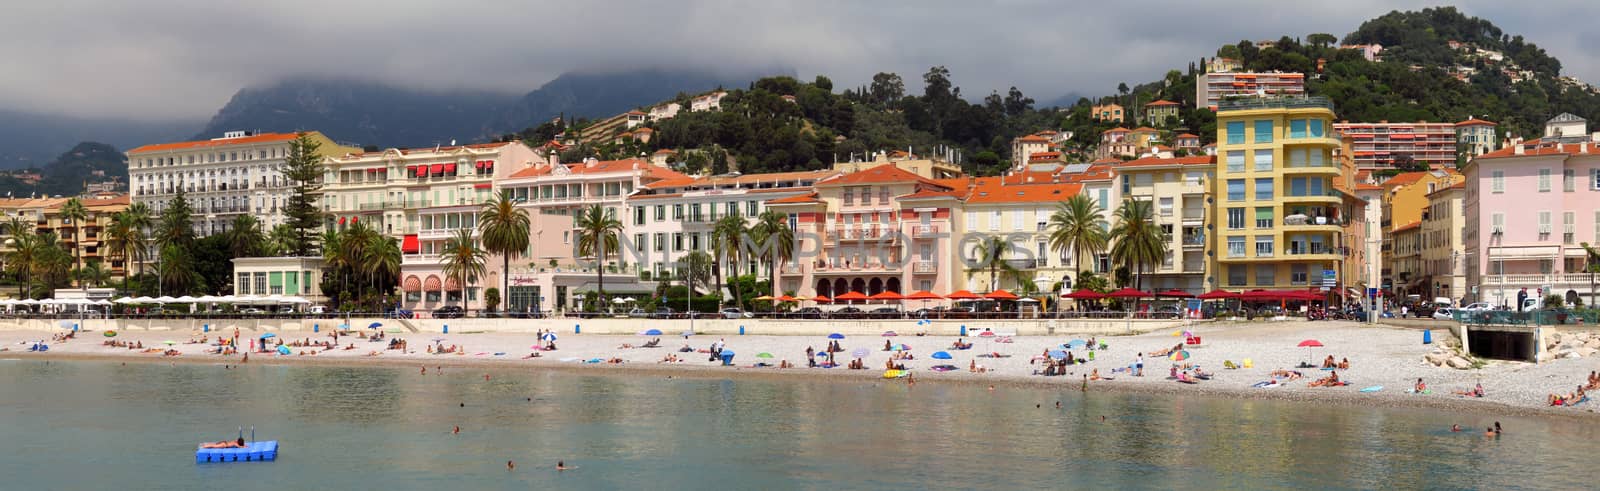 Menton, France - June 30, 2018: Menton beach and a panoramic view of the city. Unidentified people rest on the shore. Menton is a small seaside town on the French Riviera.